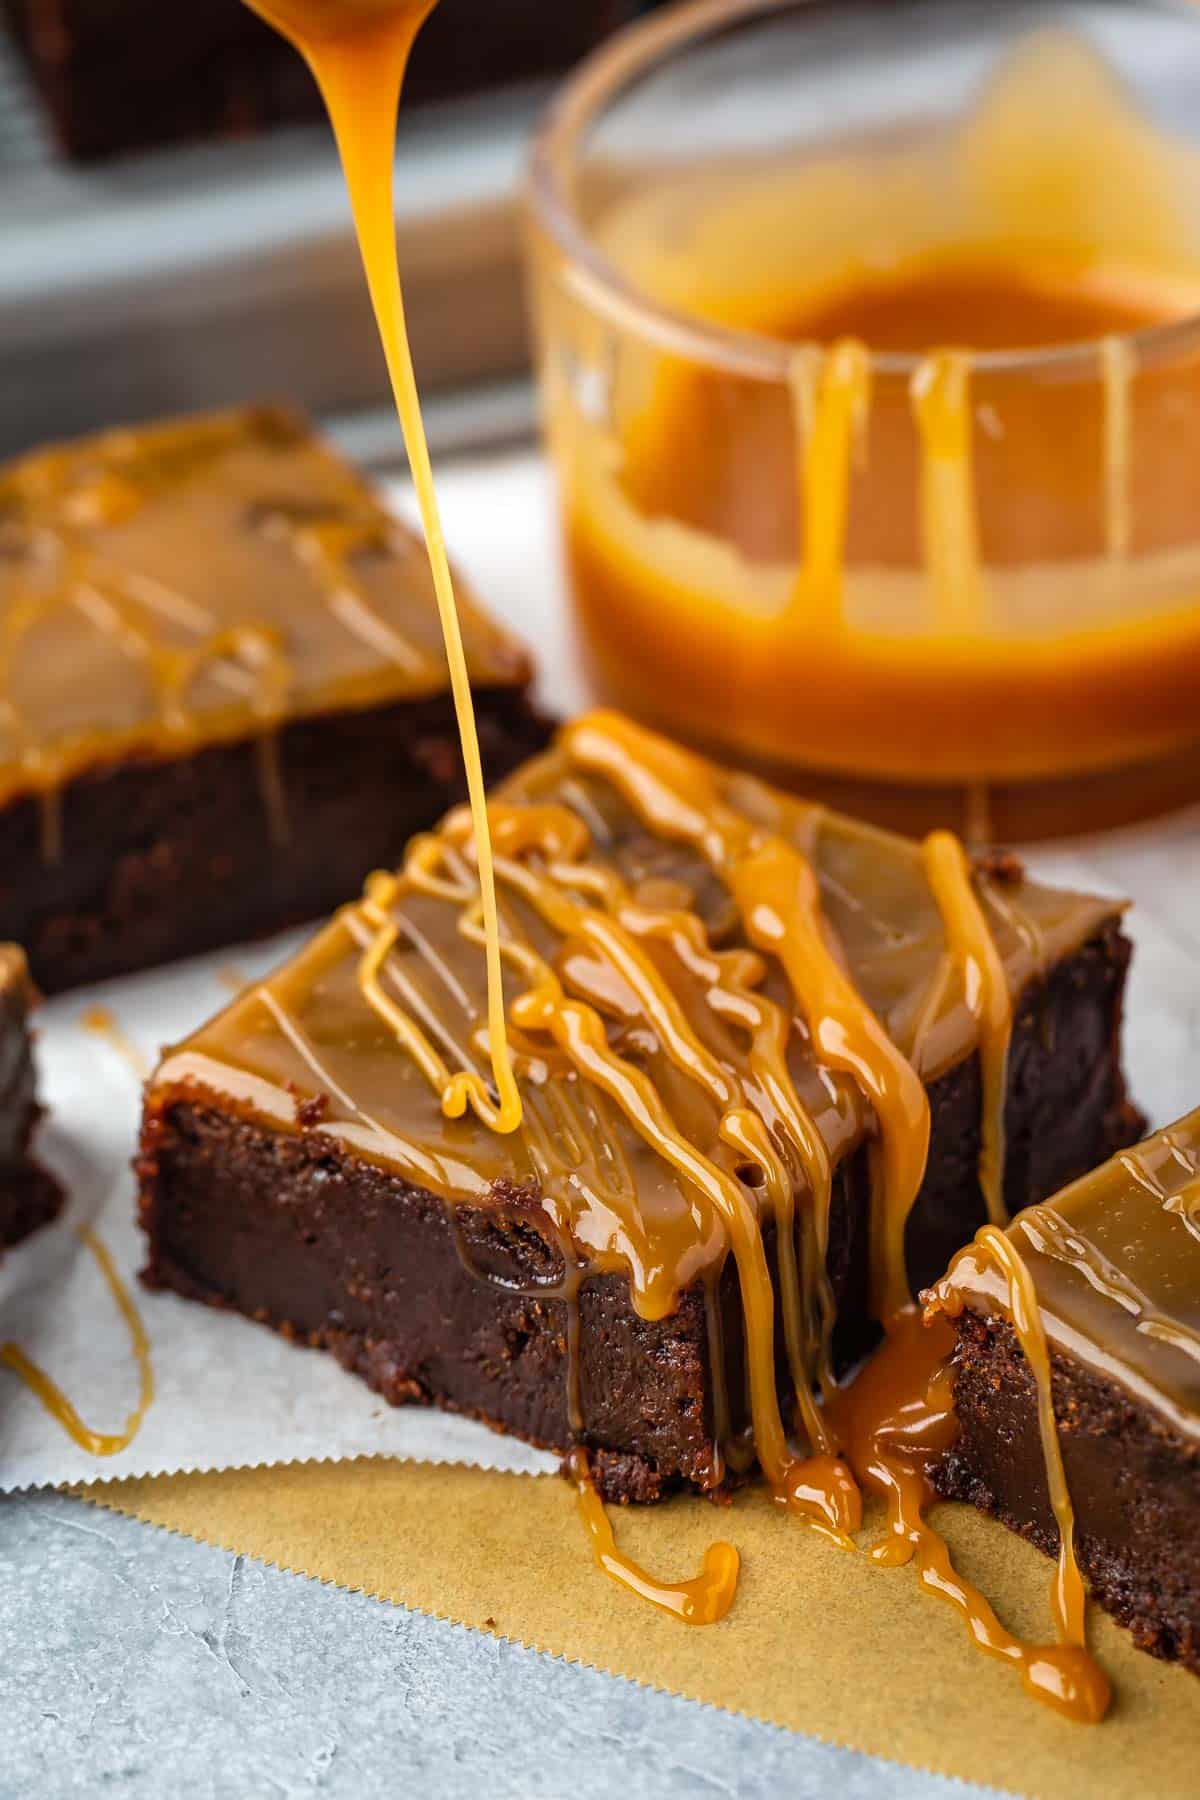 a brownie with caramel baked and dripped on top